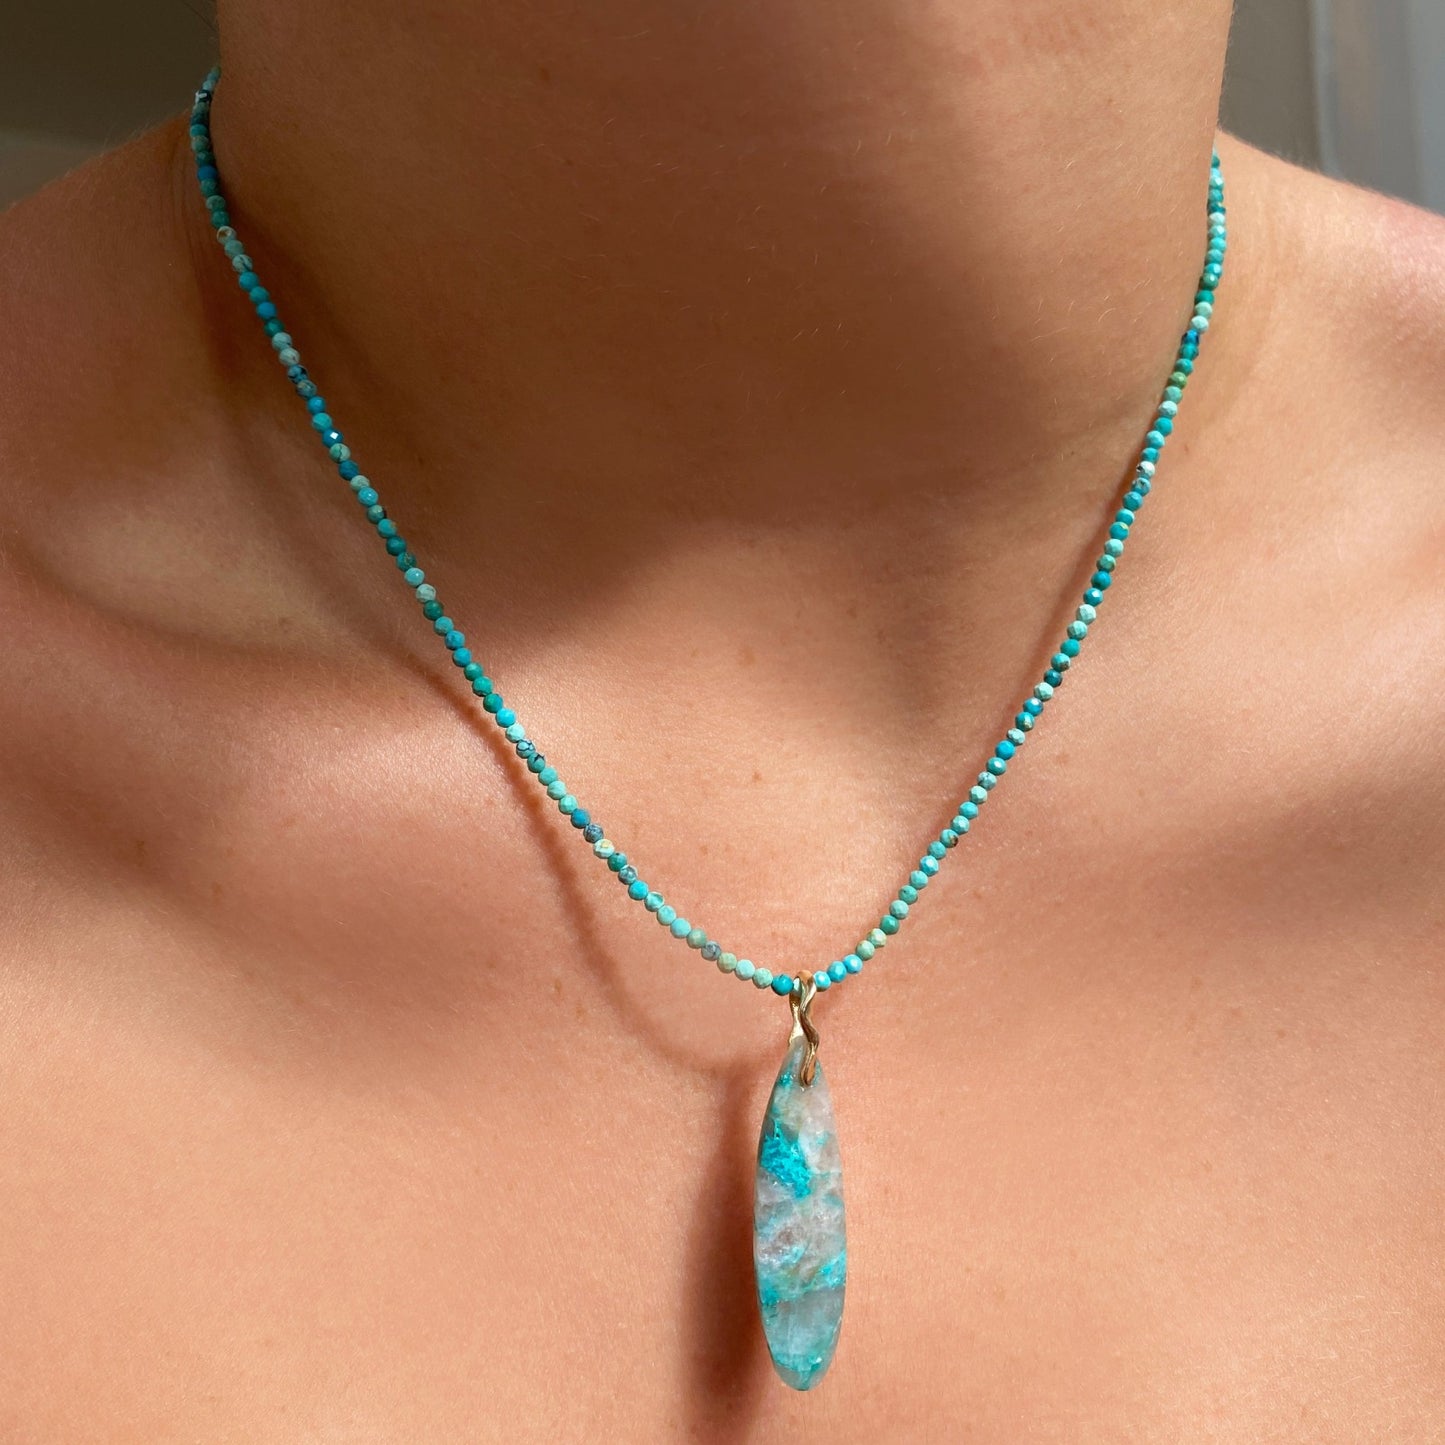 Shimmering beaded necklace made of 2mm faceted opals in shades of turquoise on a gold linking lobster clasp. Styled on a neck layered with a surfboard charm.